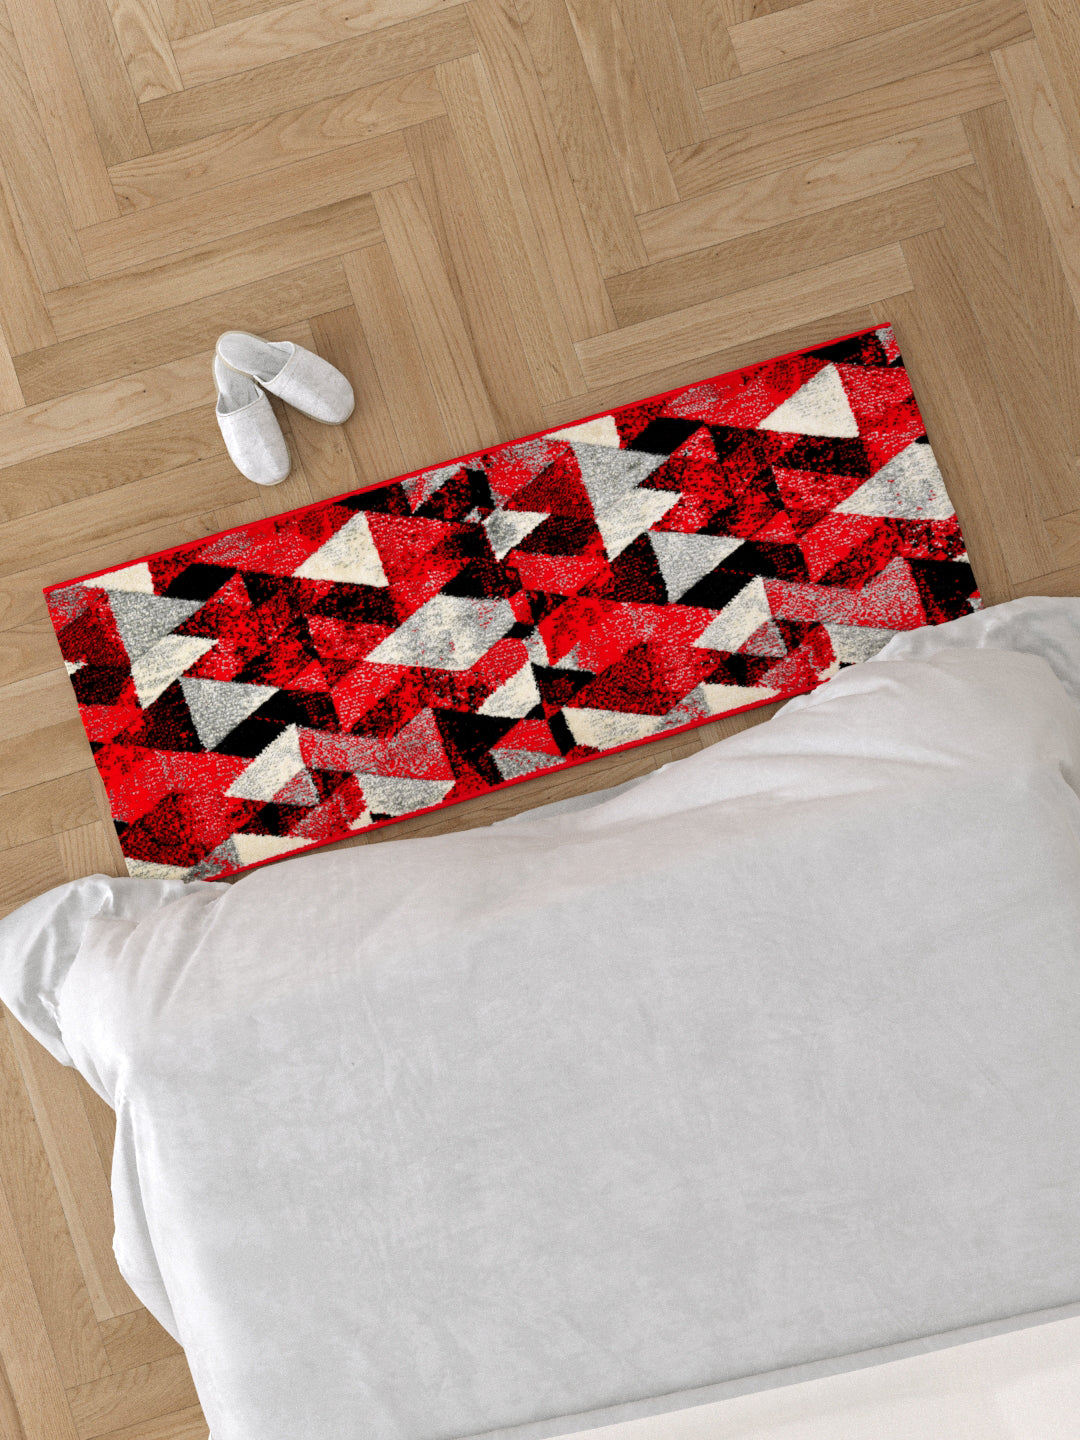 Bedside Runner Carpet Rug With Anti Skid Backing; 57x140 cms; Red Black Triangles